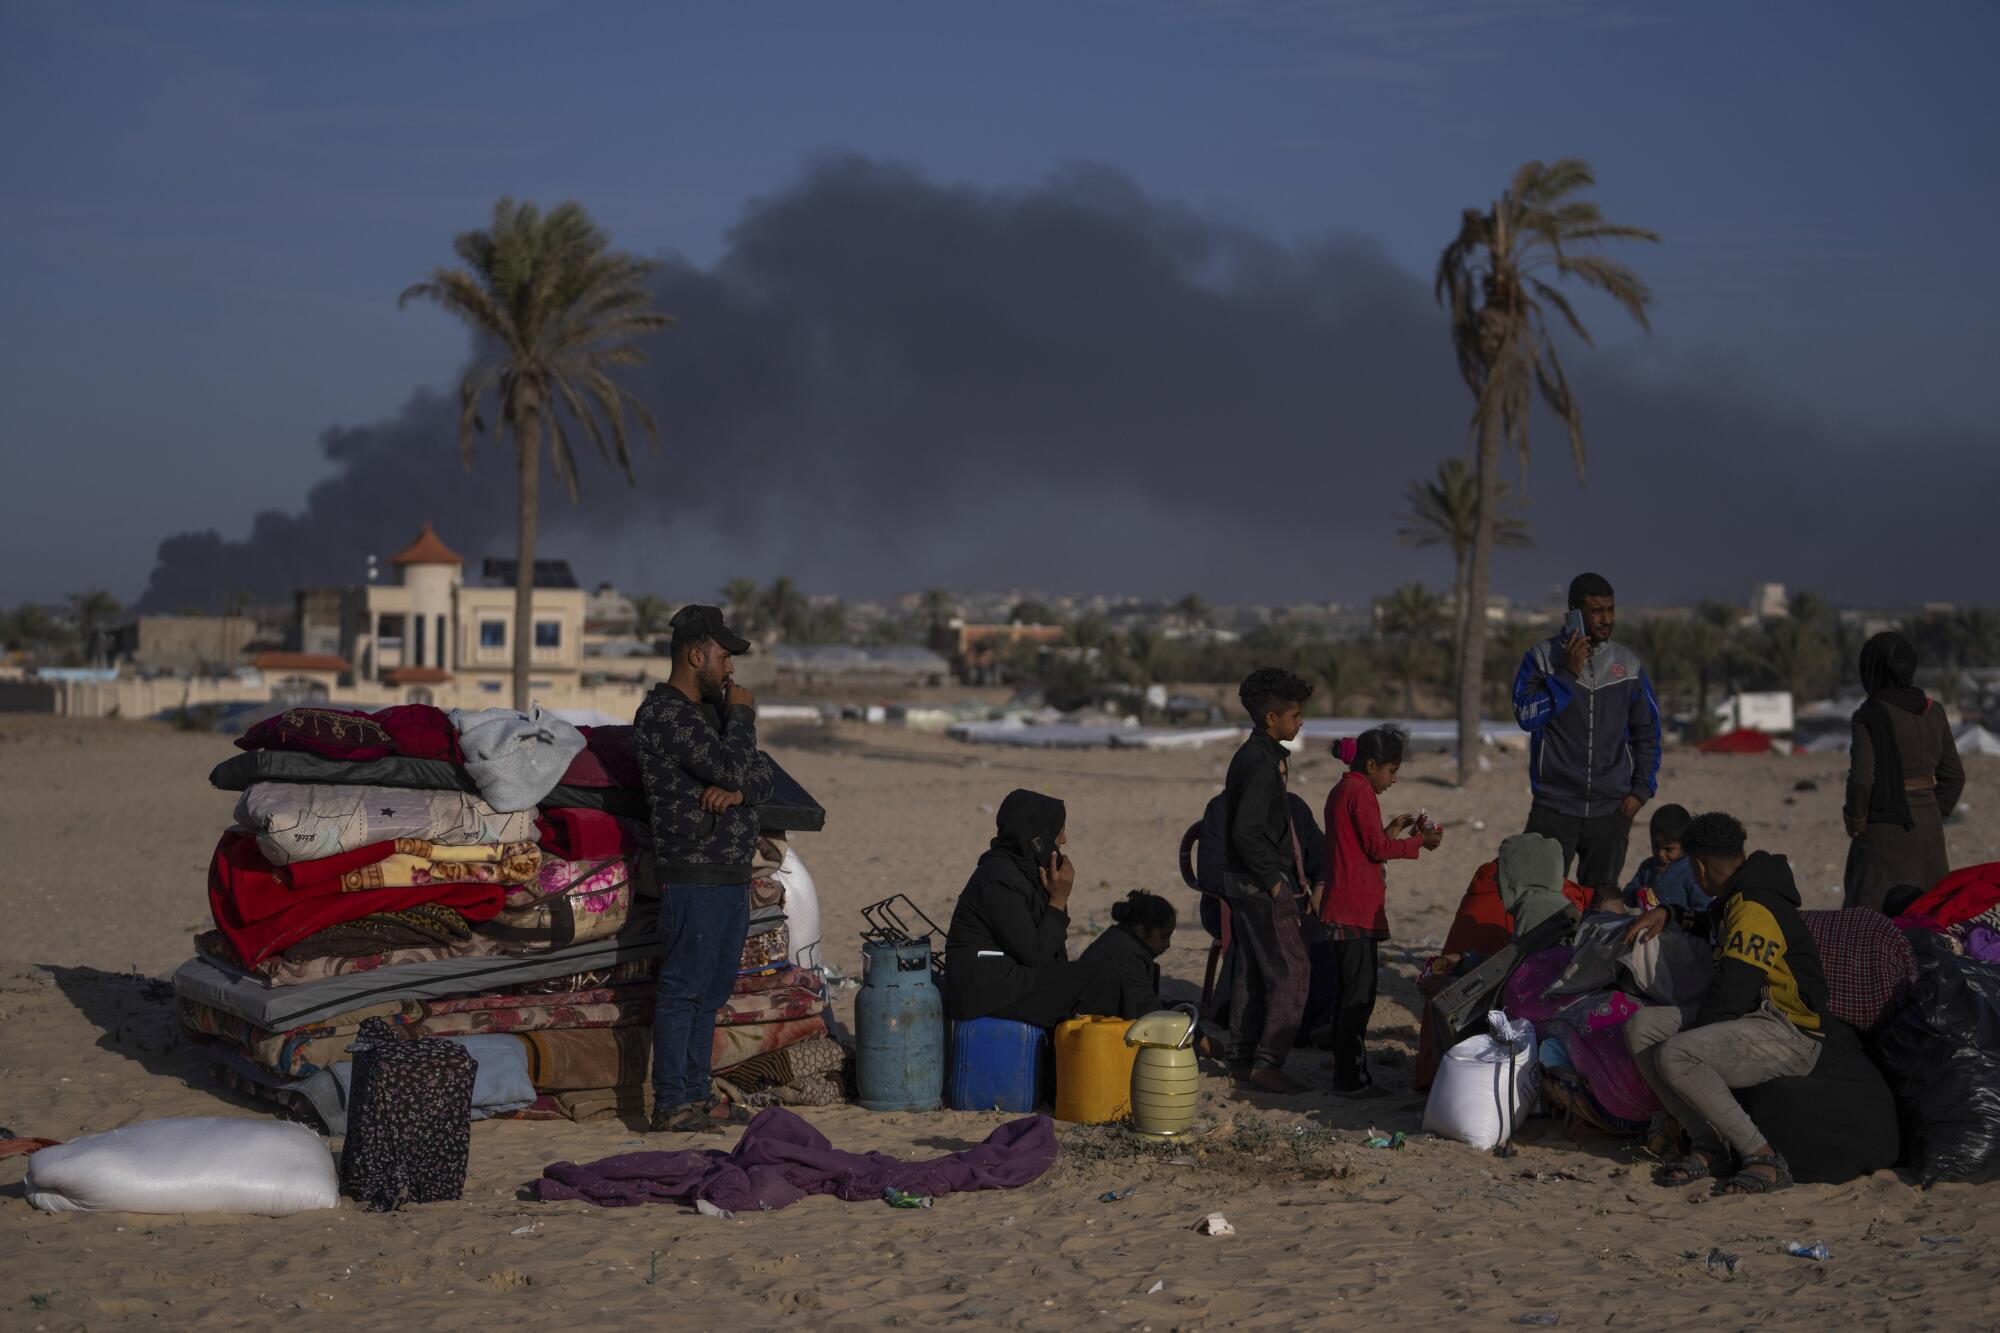 Gazans gather outside with their belongings in Rafah